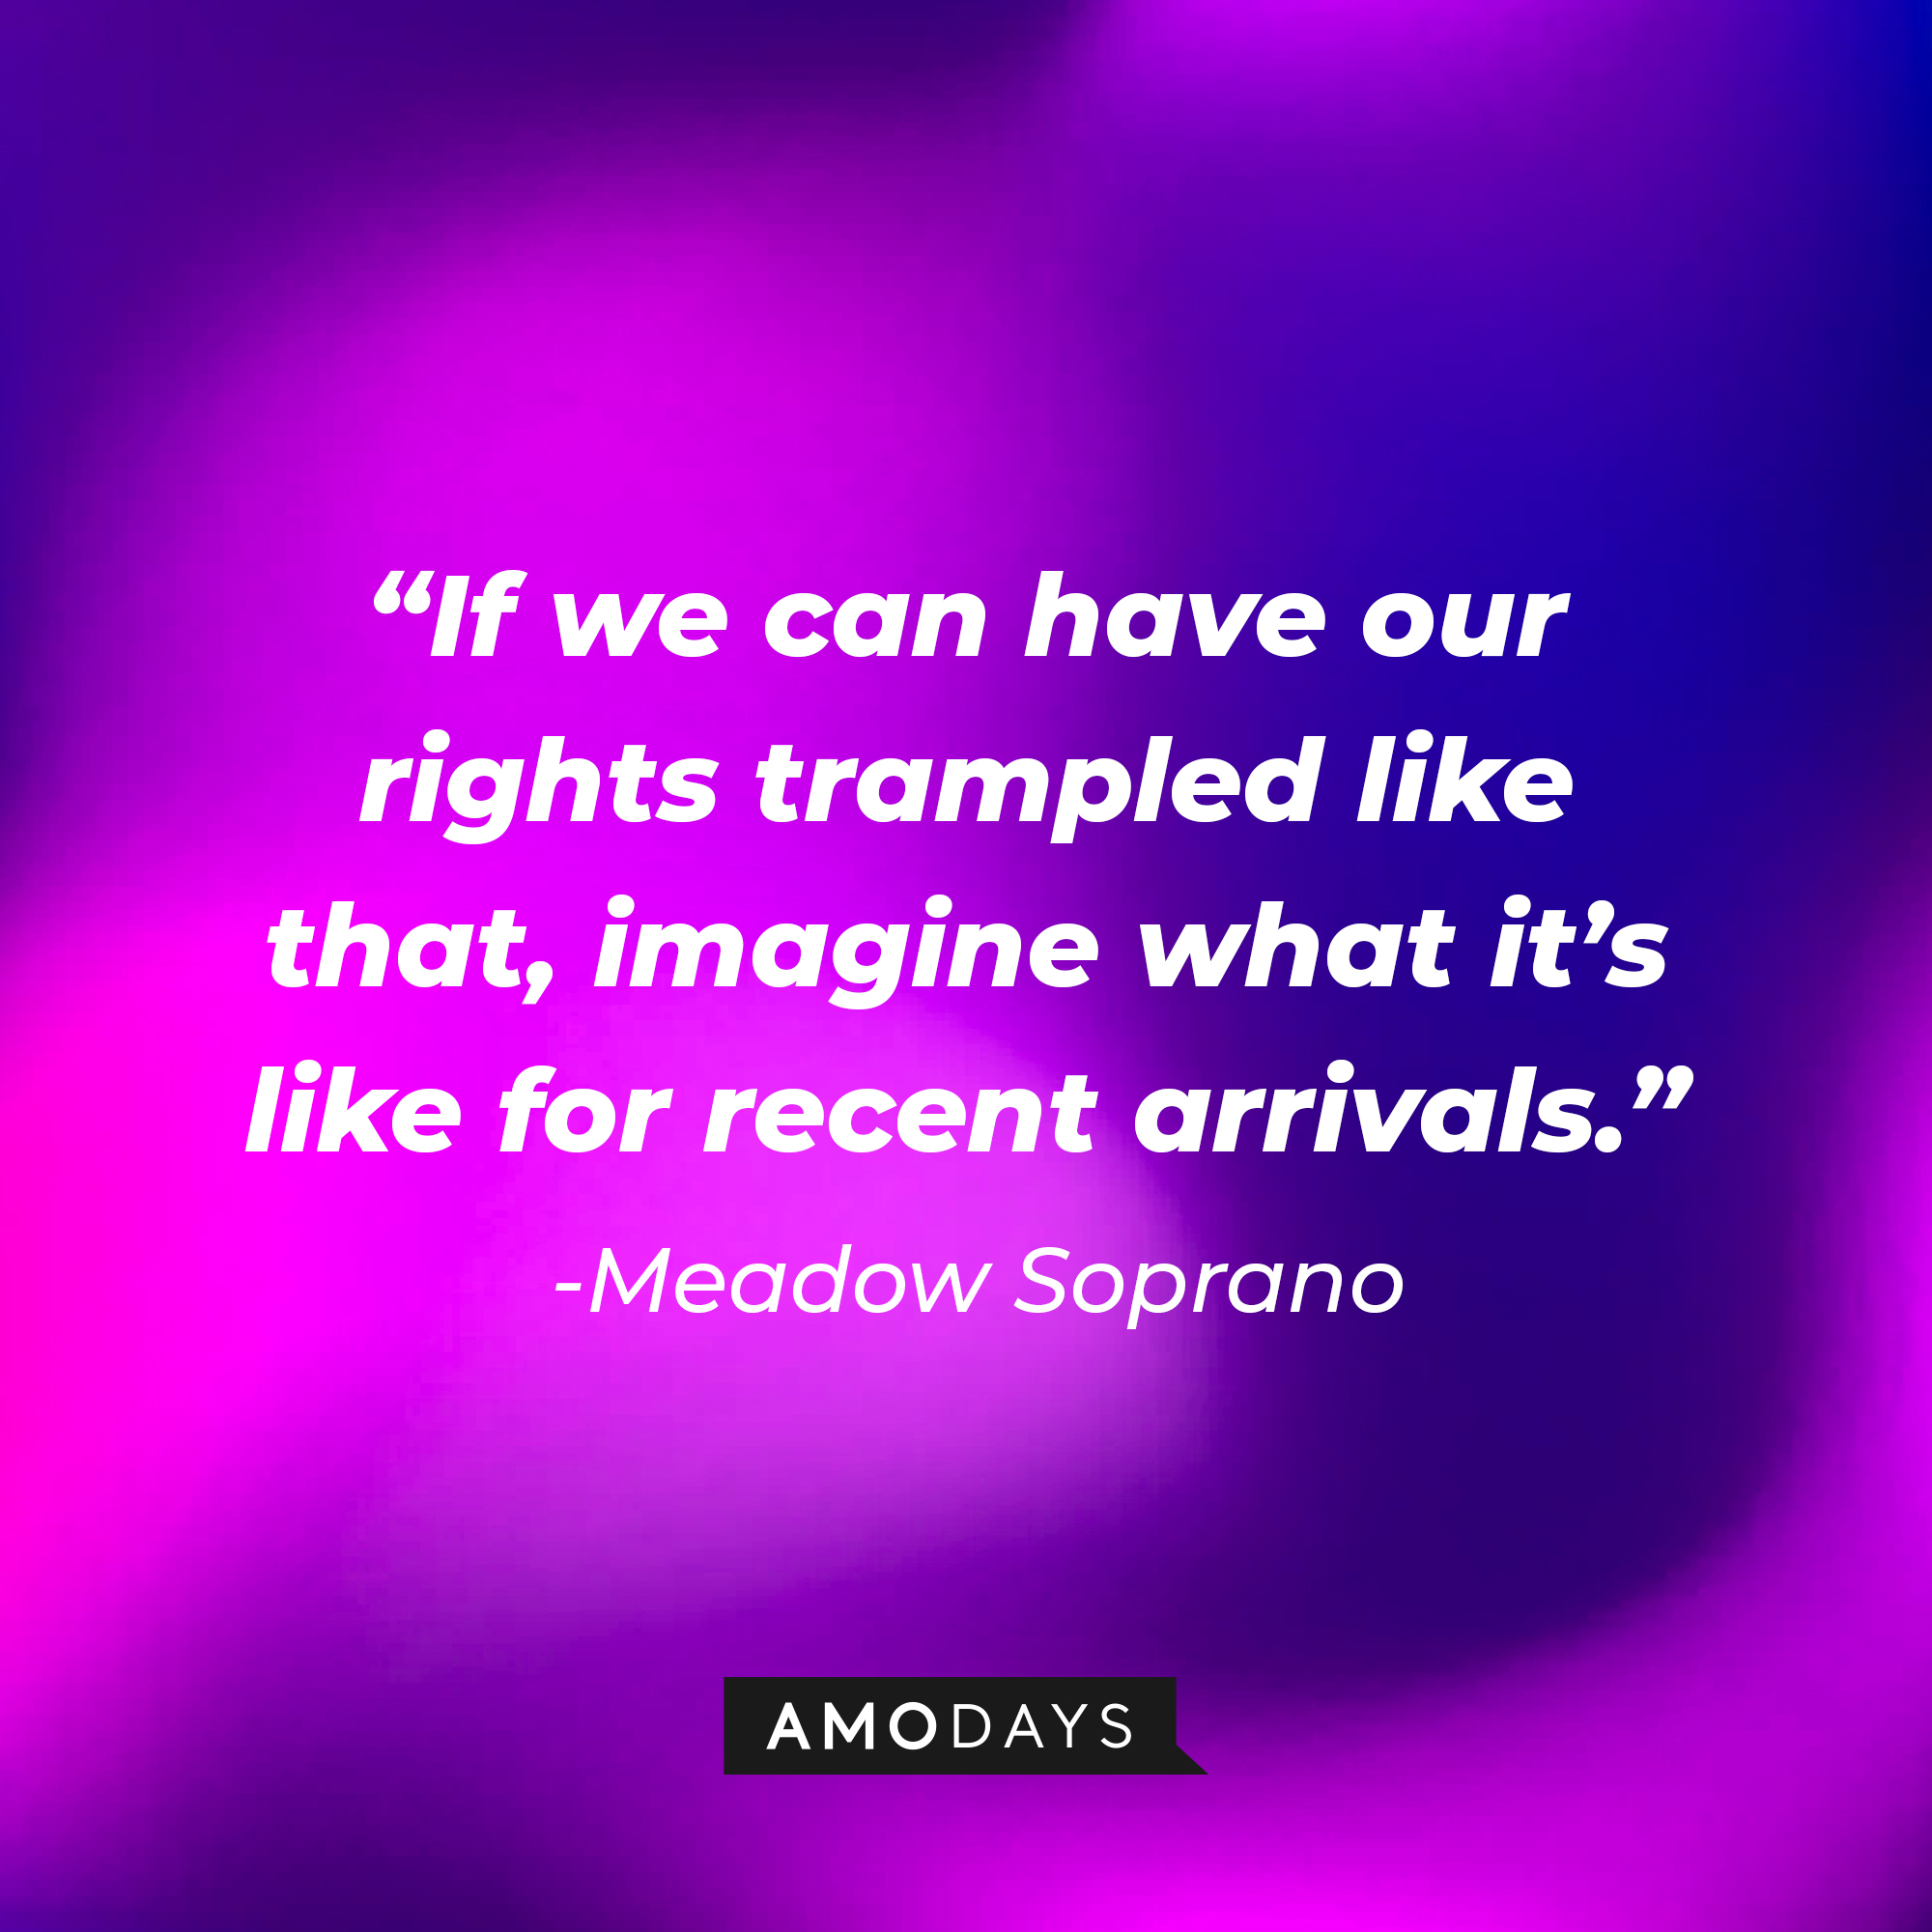 Meadow Soprano’s quote: “If we can have our rights trampled like that, imagine what it’s like for recent arrivals.” | Source: AmoDays